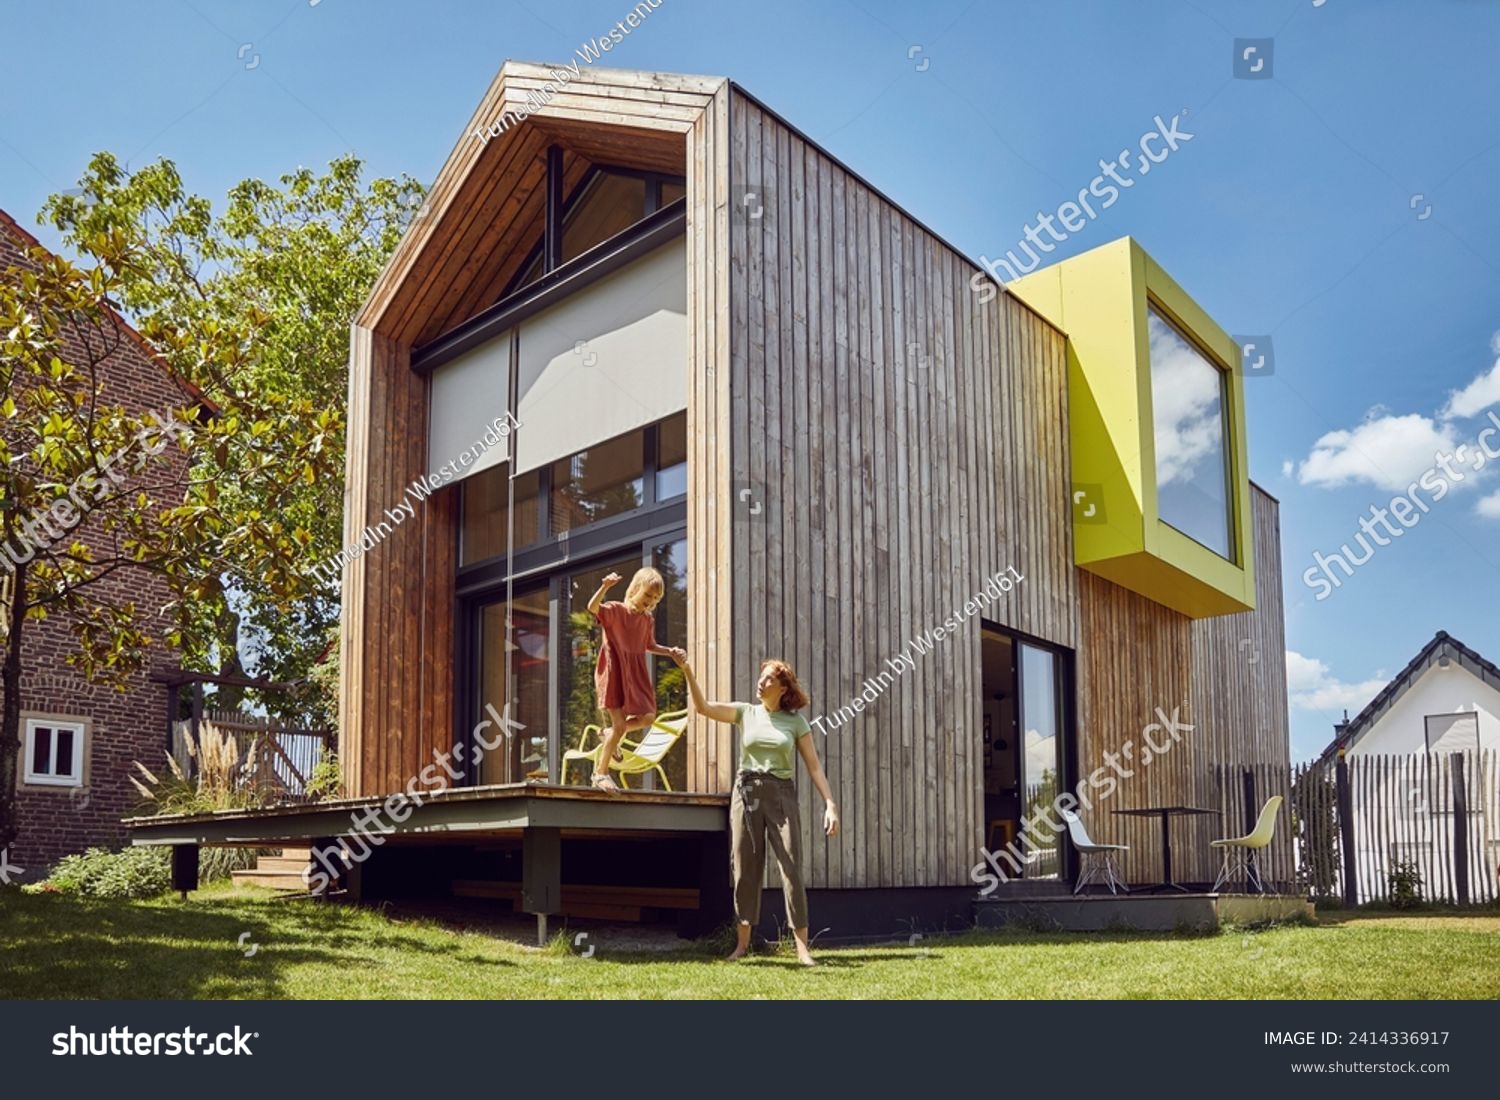 Mother assisting daughter in jumping outside tiny house at yard #2414336917